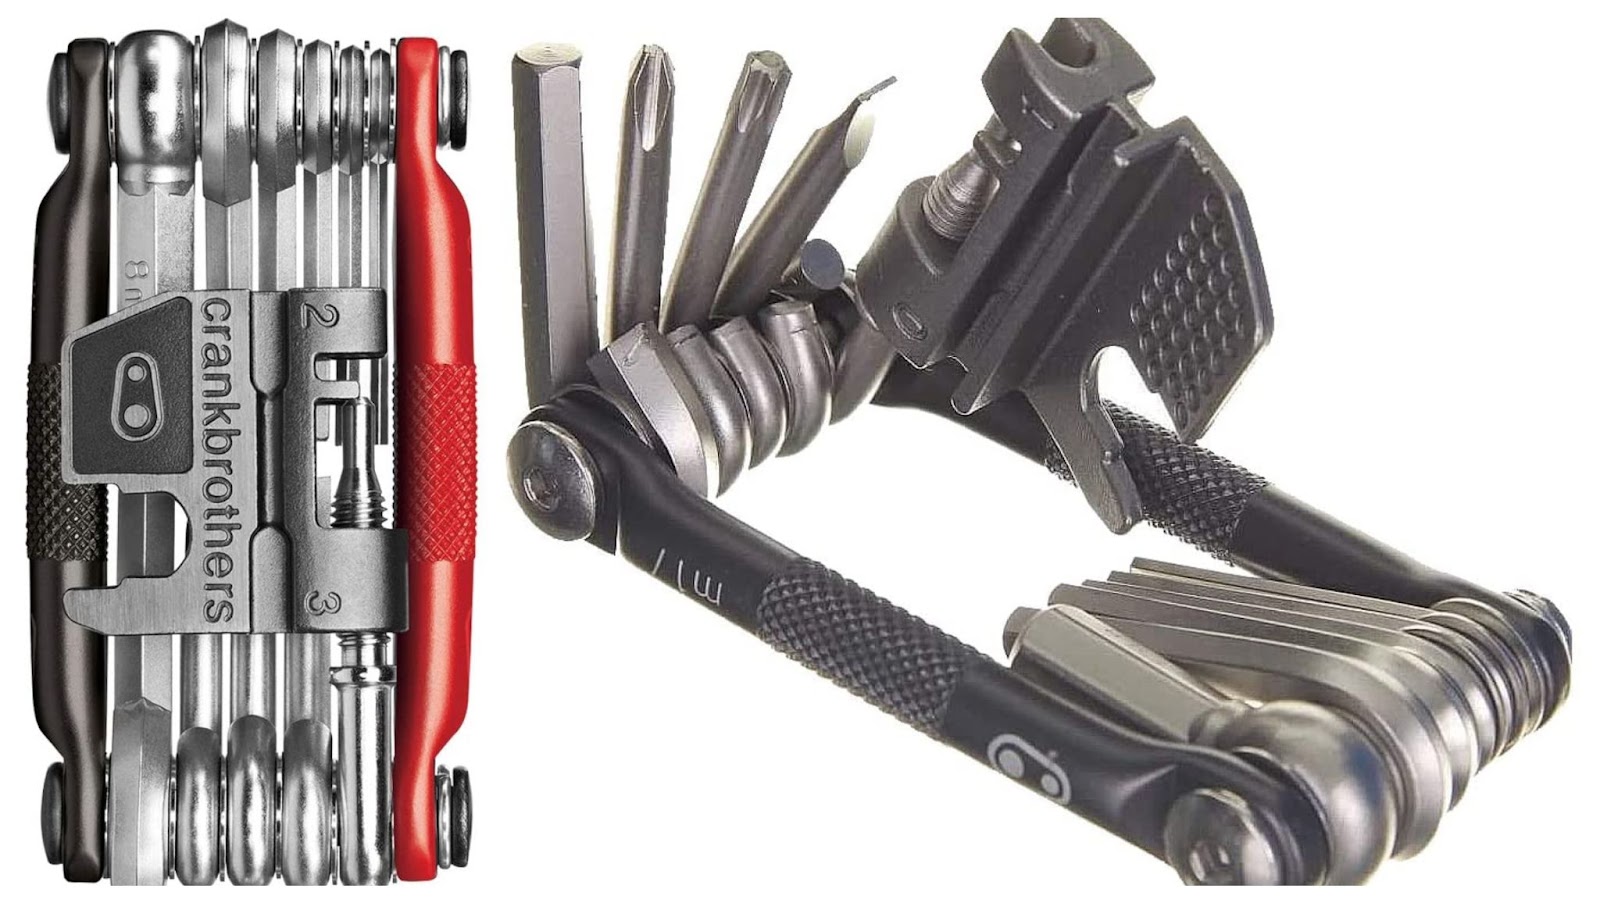 Professional Mountain Biker's Tool Box Check (9 Tools You Should Carry